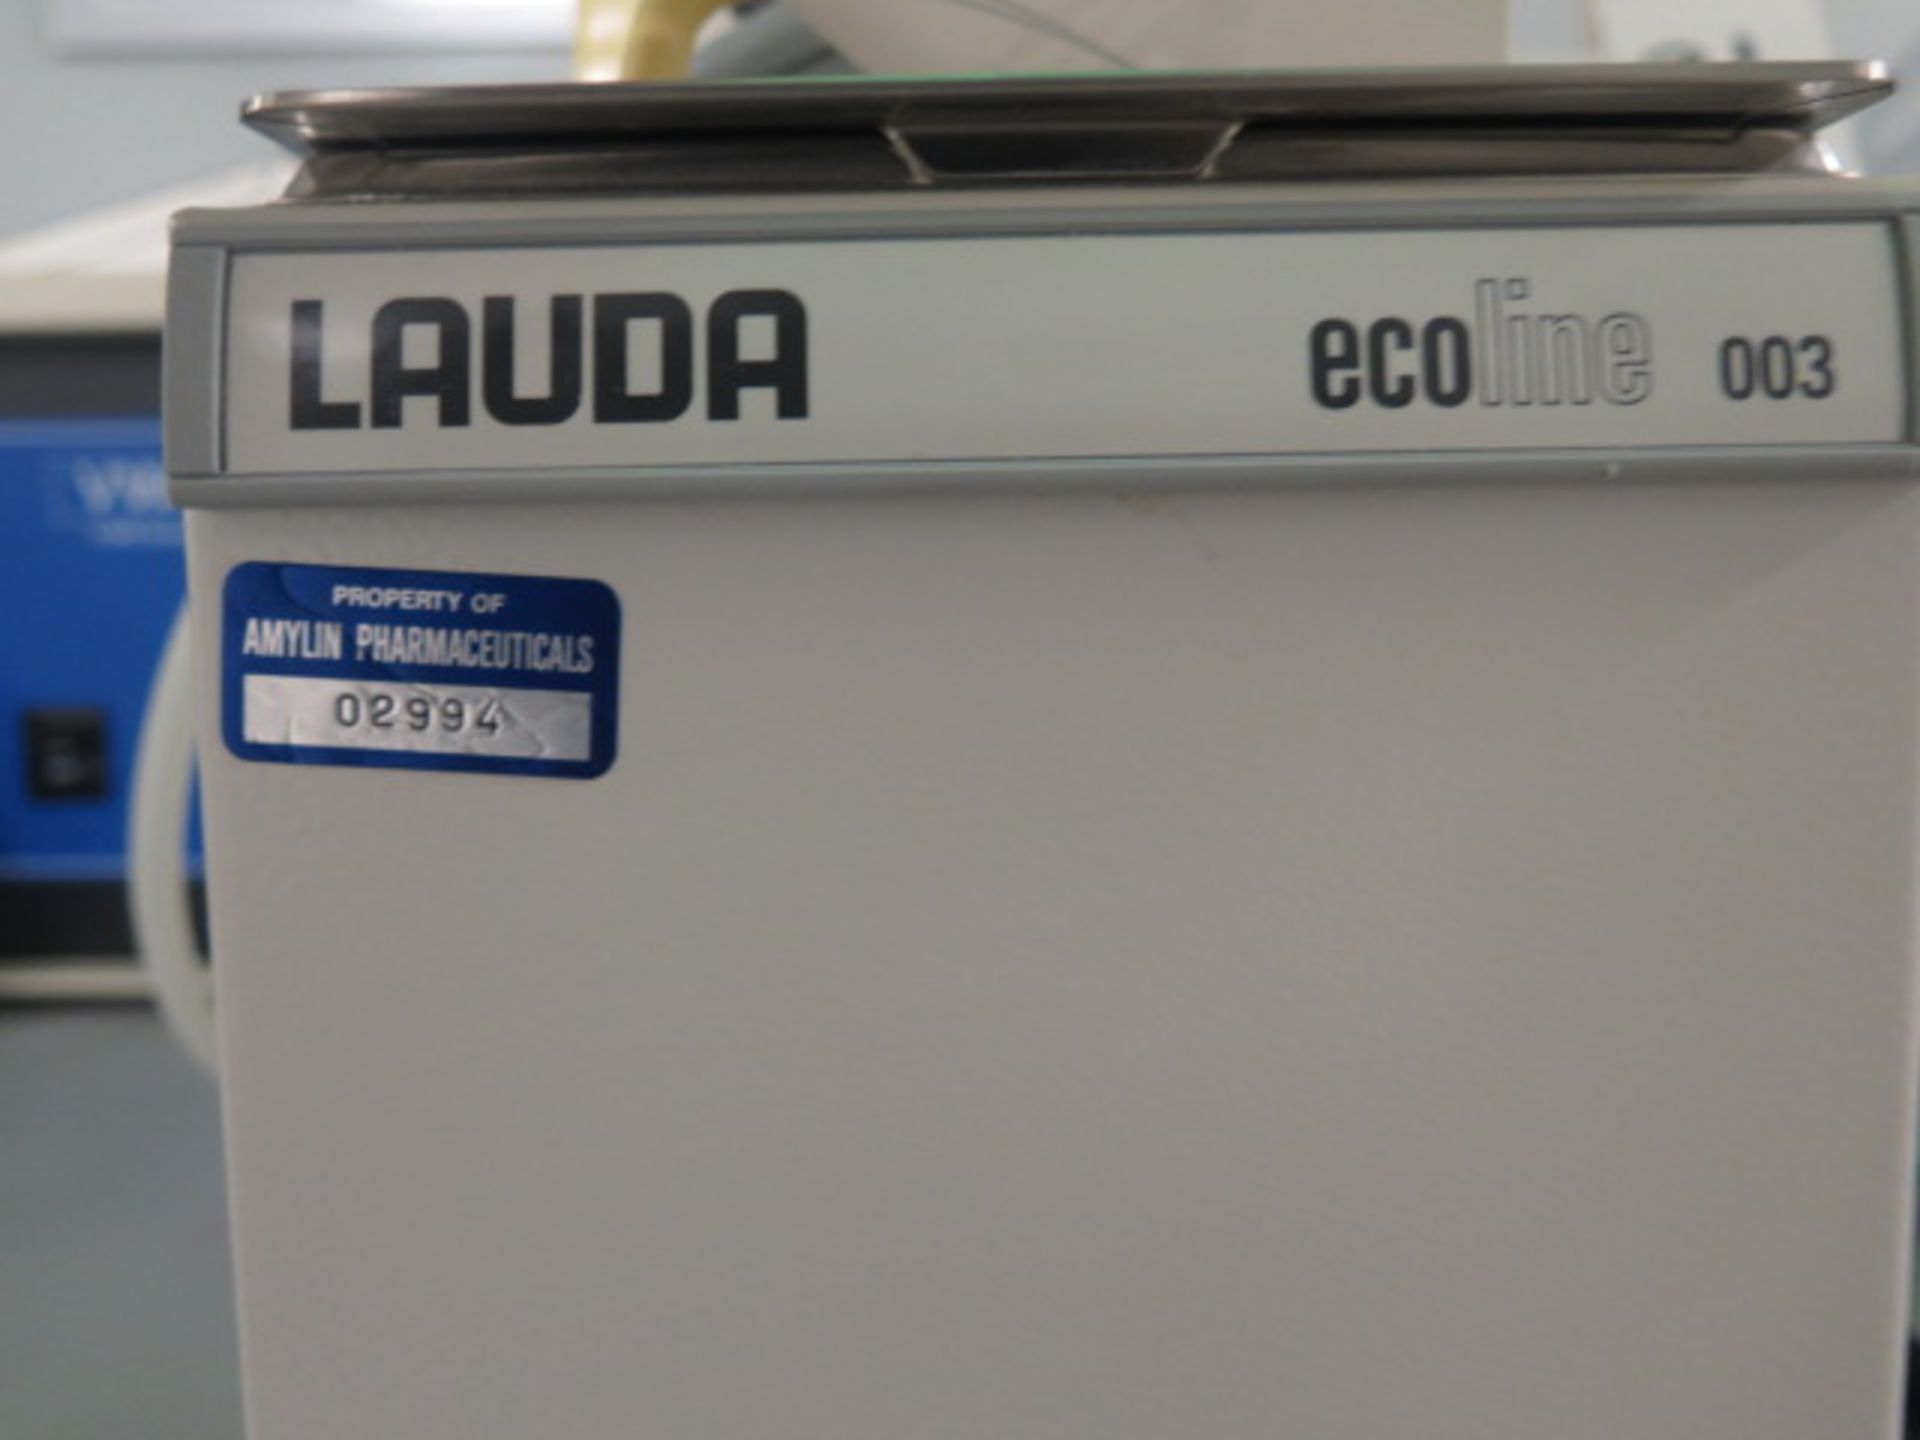 Lauda Ecoline 003 Heated Water Bath | Loading Price: Hand Carry or Contact Rigger - Image 5 of 6